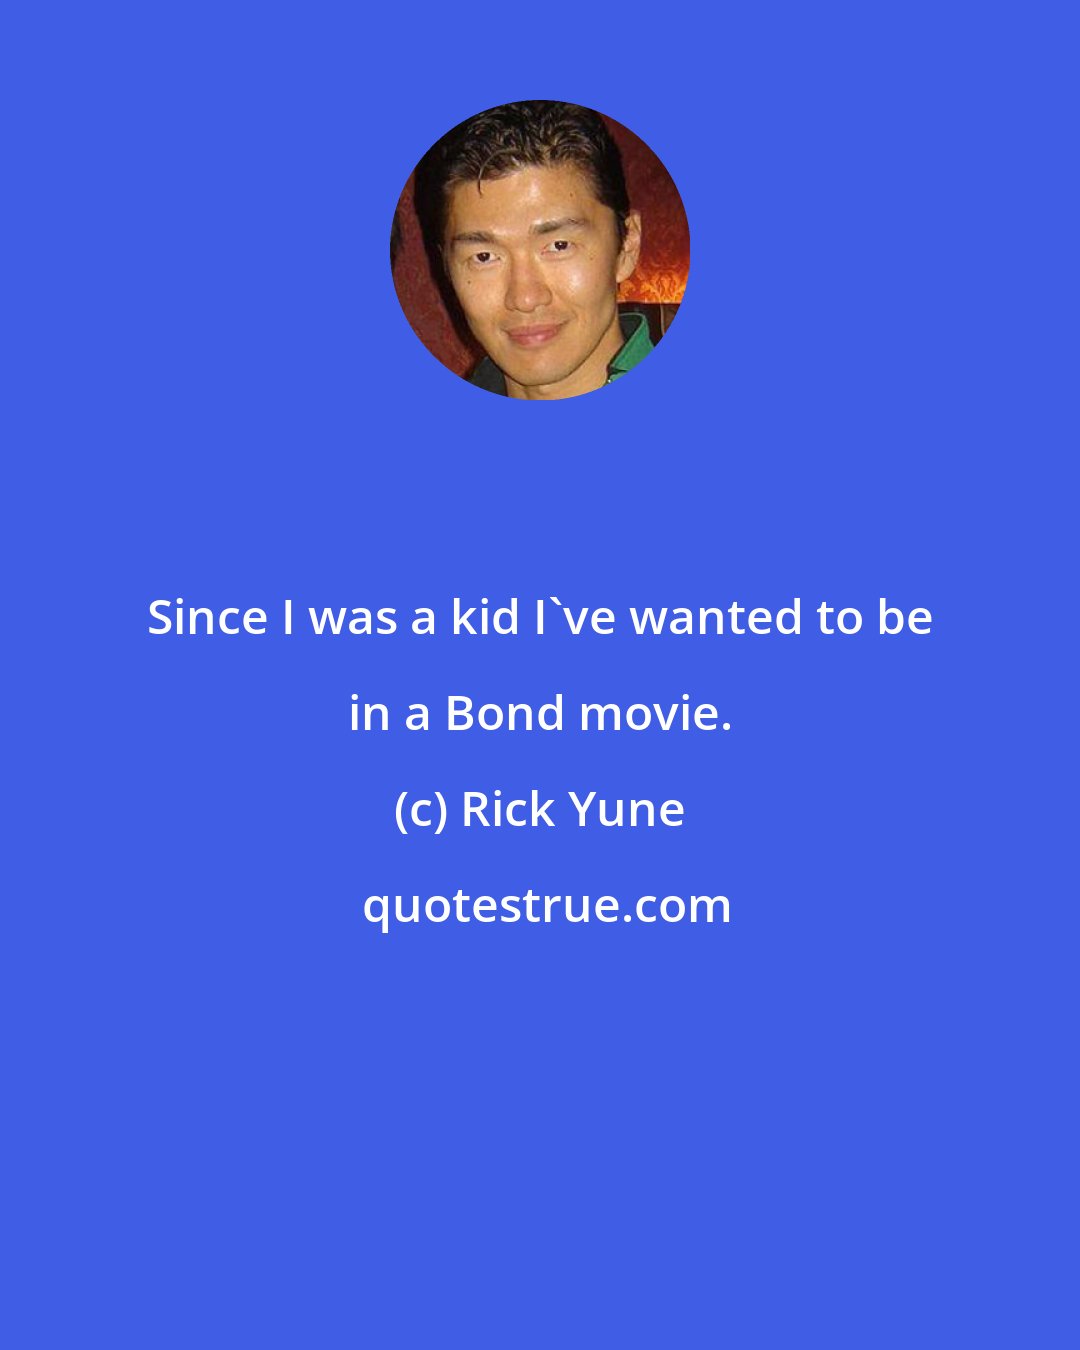 Rick Yune: Since I was a kid I've wanted to be in a Bond movie.